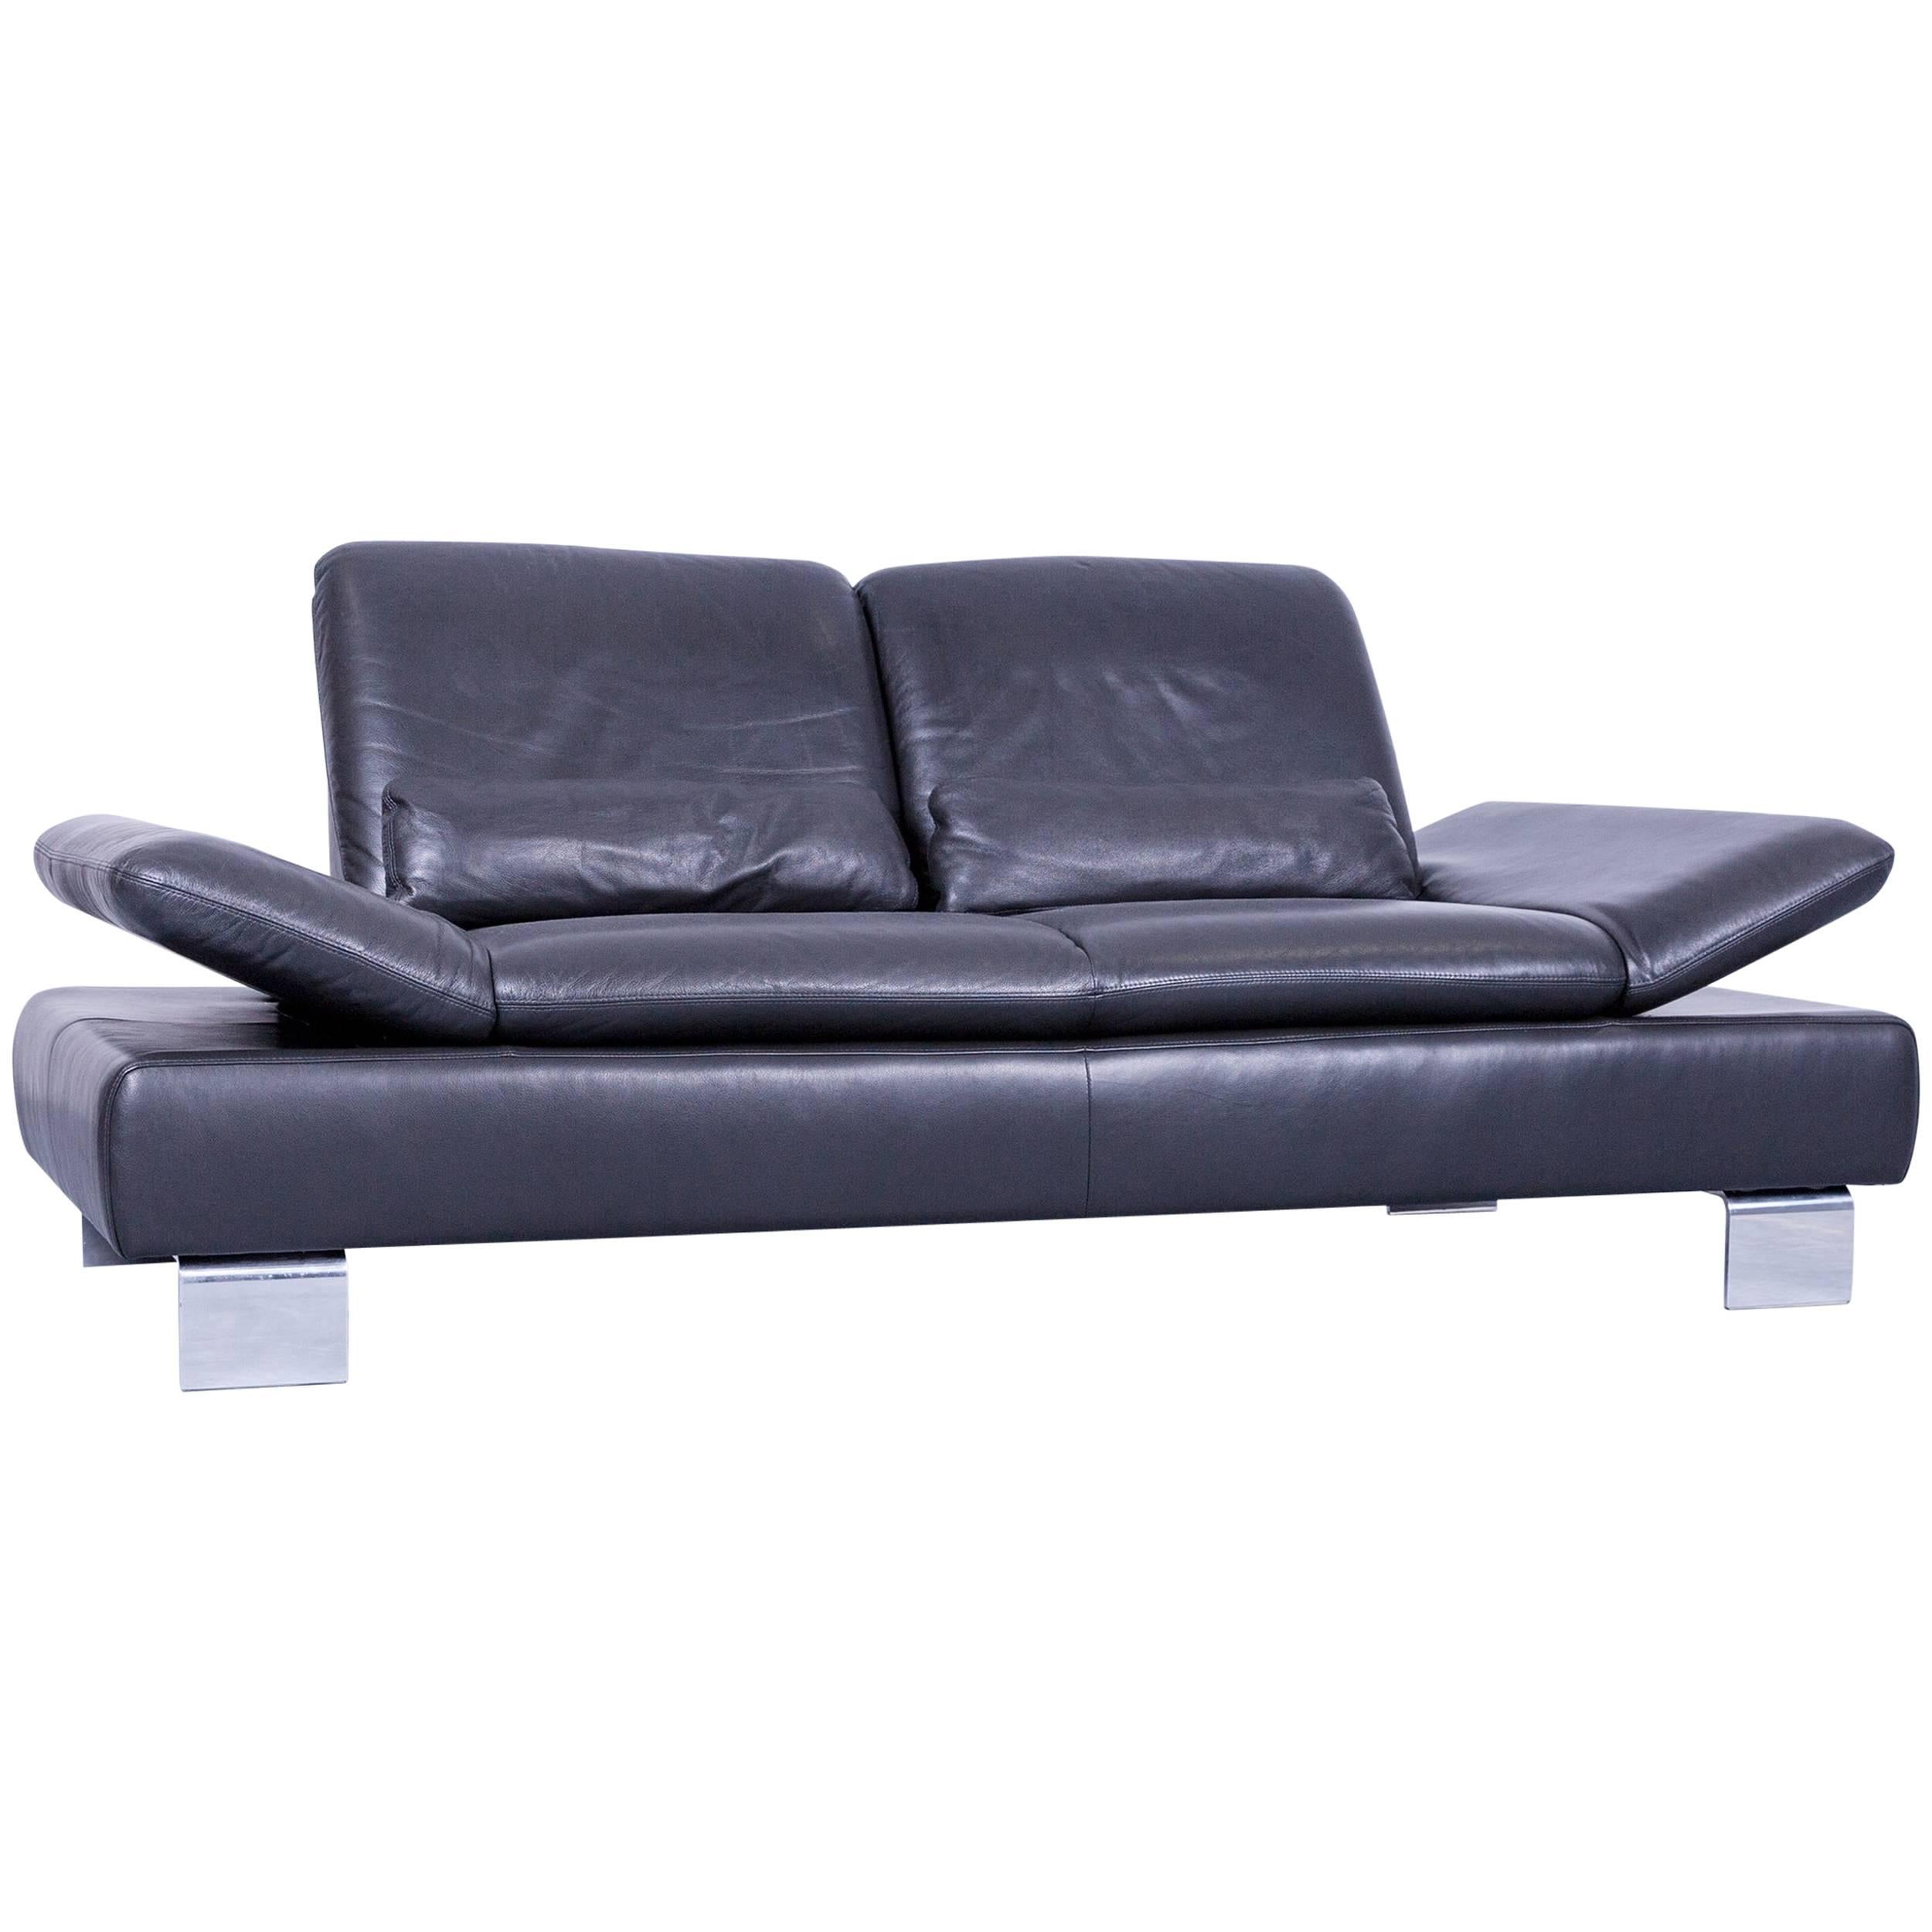 Willi Schillig Designer Sofa Two-Seat Grey Anthracite Leather Couch Function For Sale